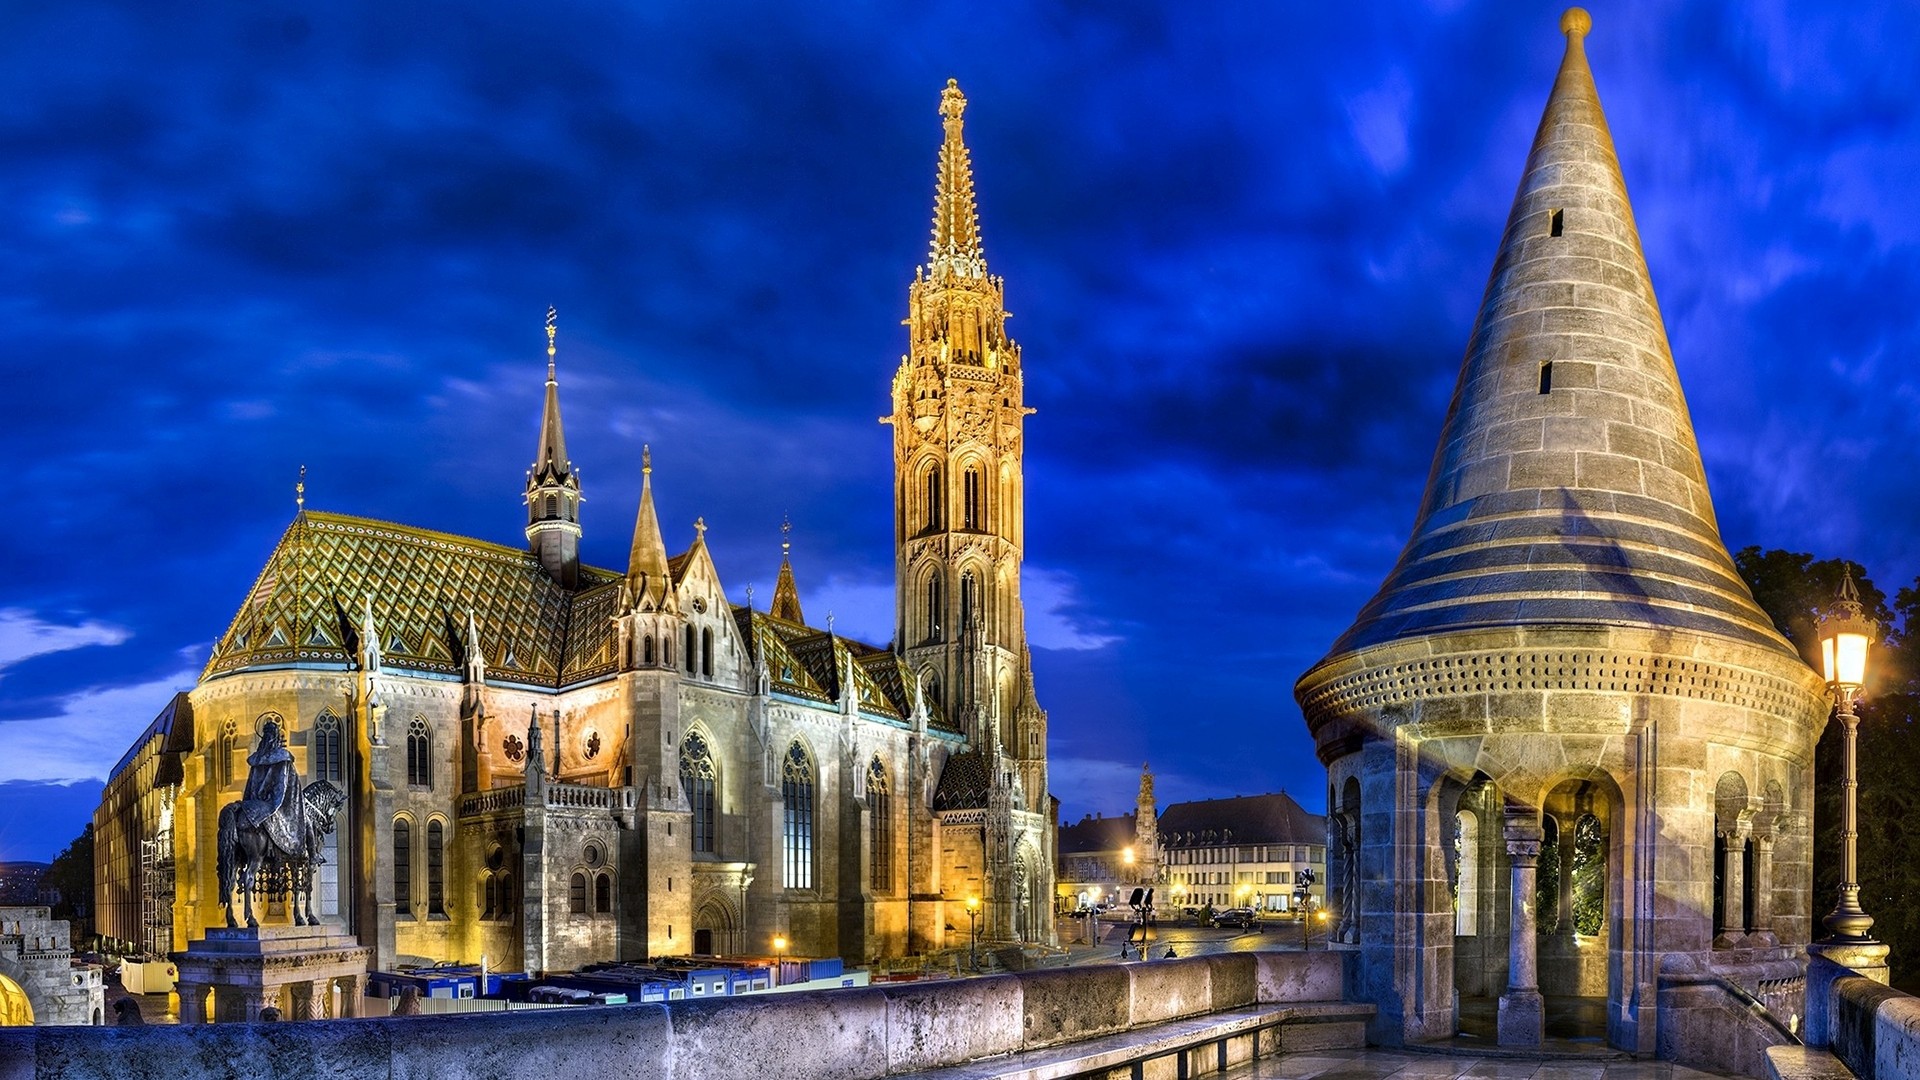 General 1920x1080 cityscape architecture building city night lights Budapest Hungary cathedral tower ancient history statue old building town square bricks trees clouds evening church horse king HDR